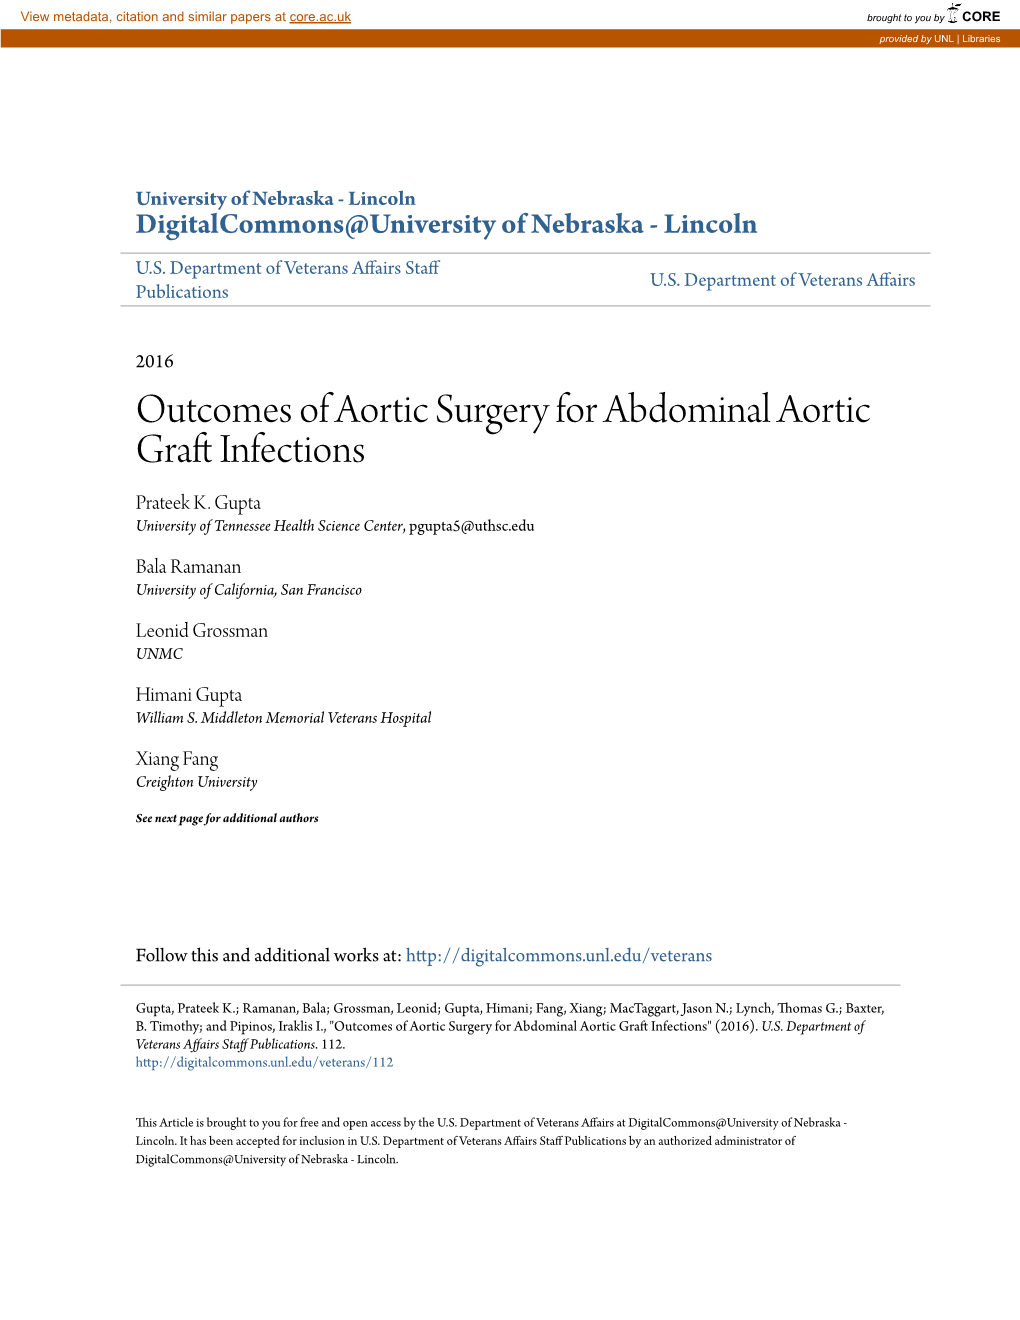 Outcomes of Aortic Surgery for Abdominal Aortic Graft Infections